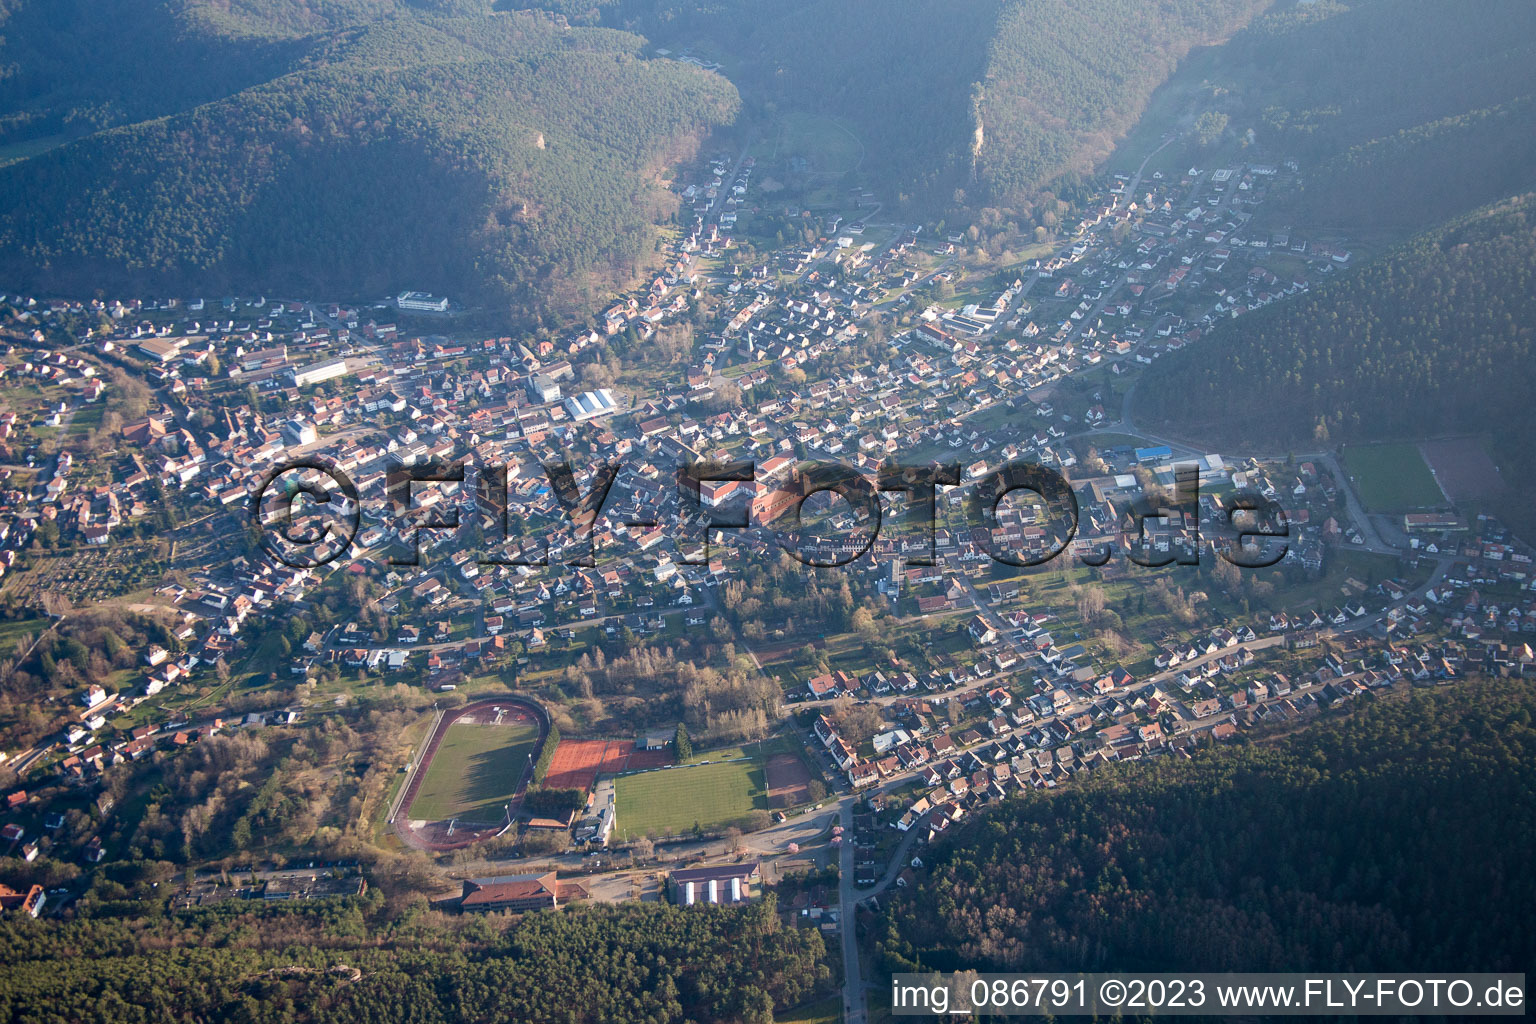 Hauenstein in the state Rhineland-Palatinate, Germany seen from above